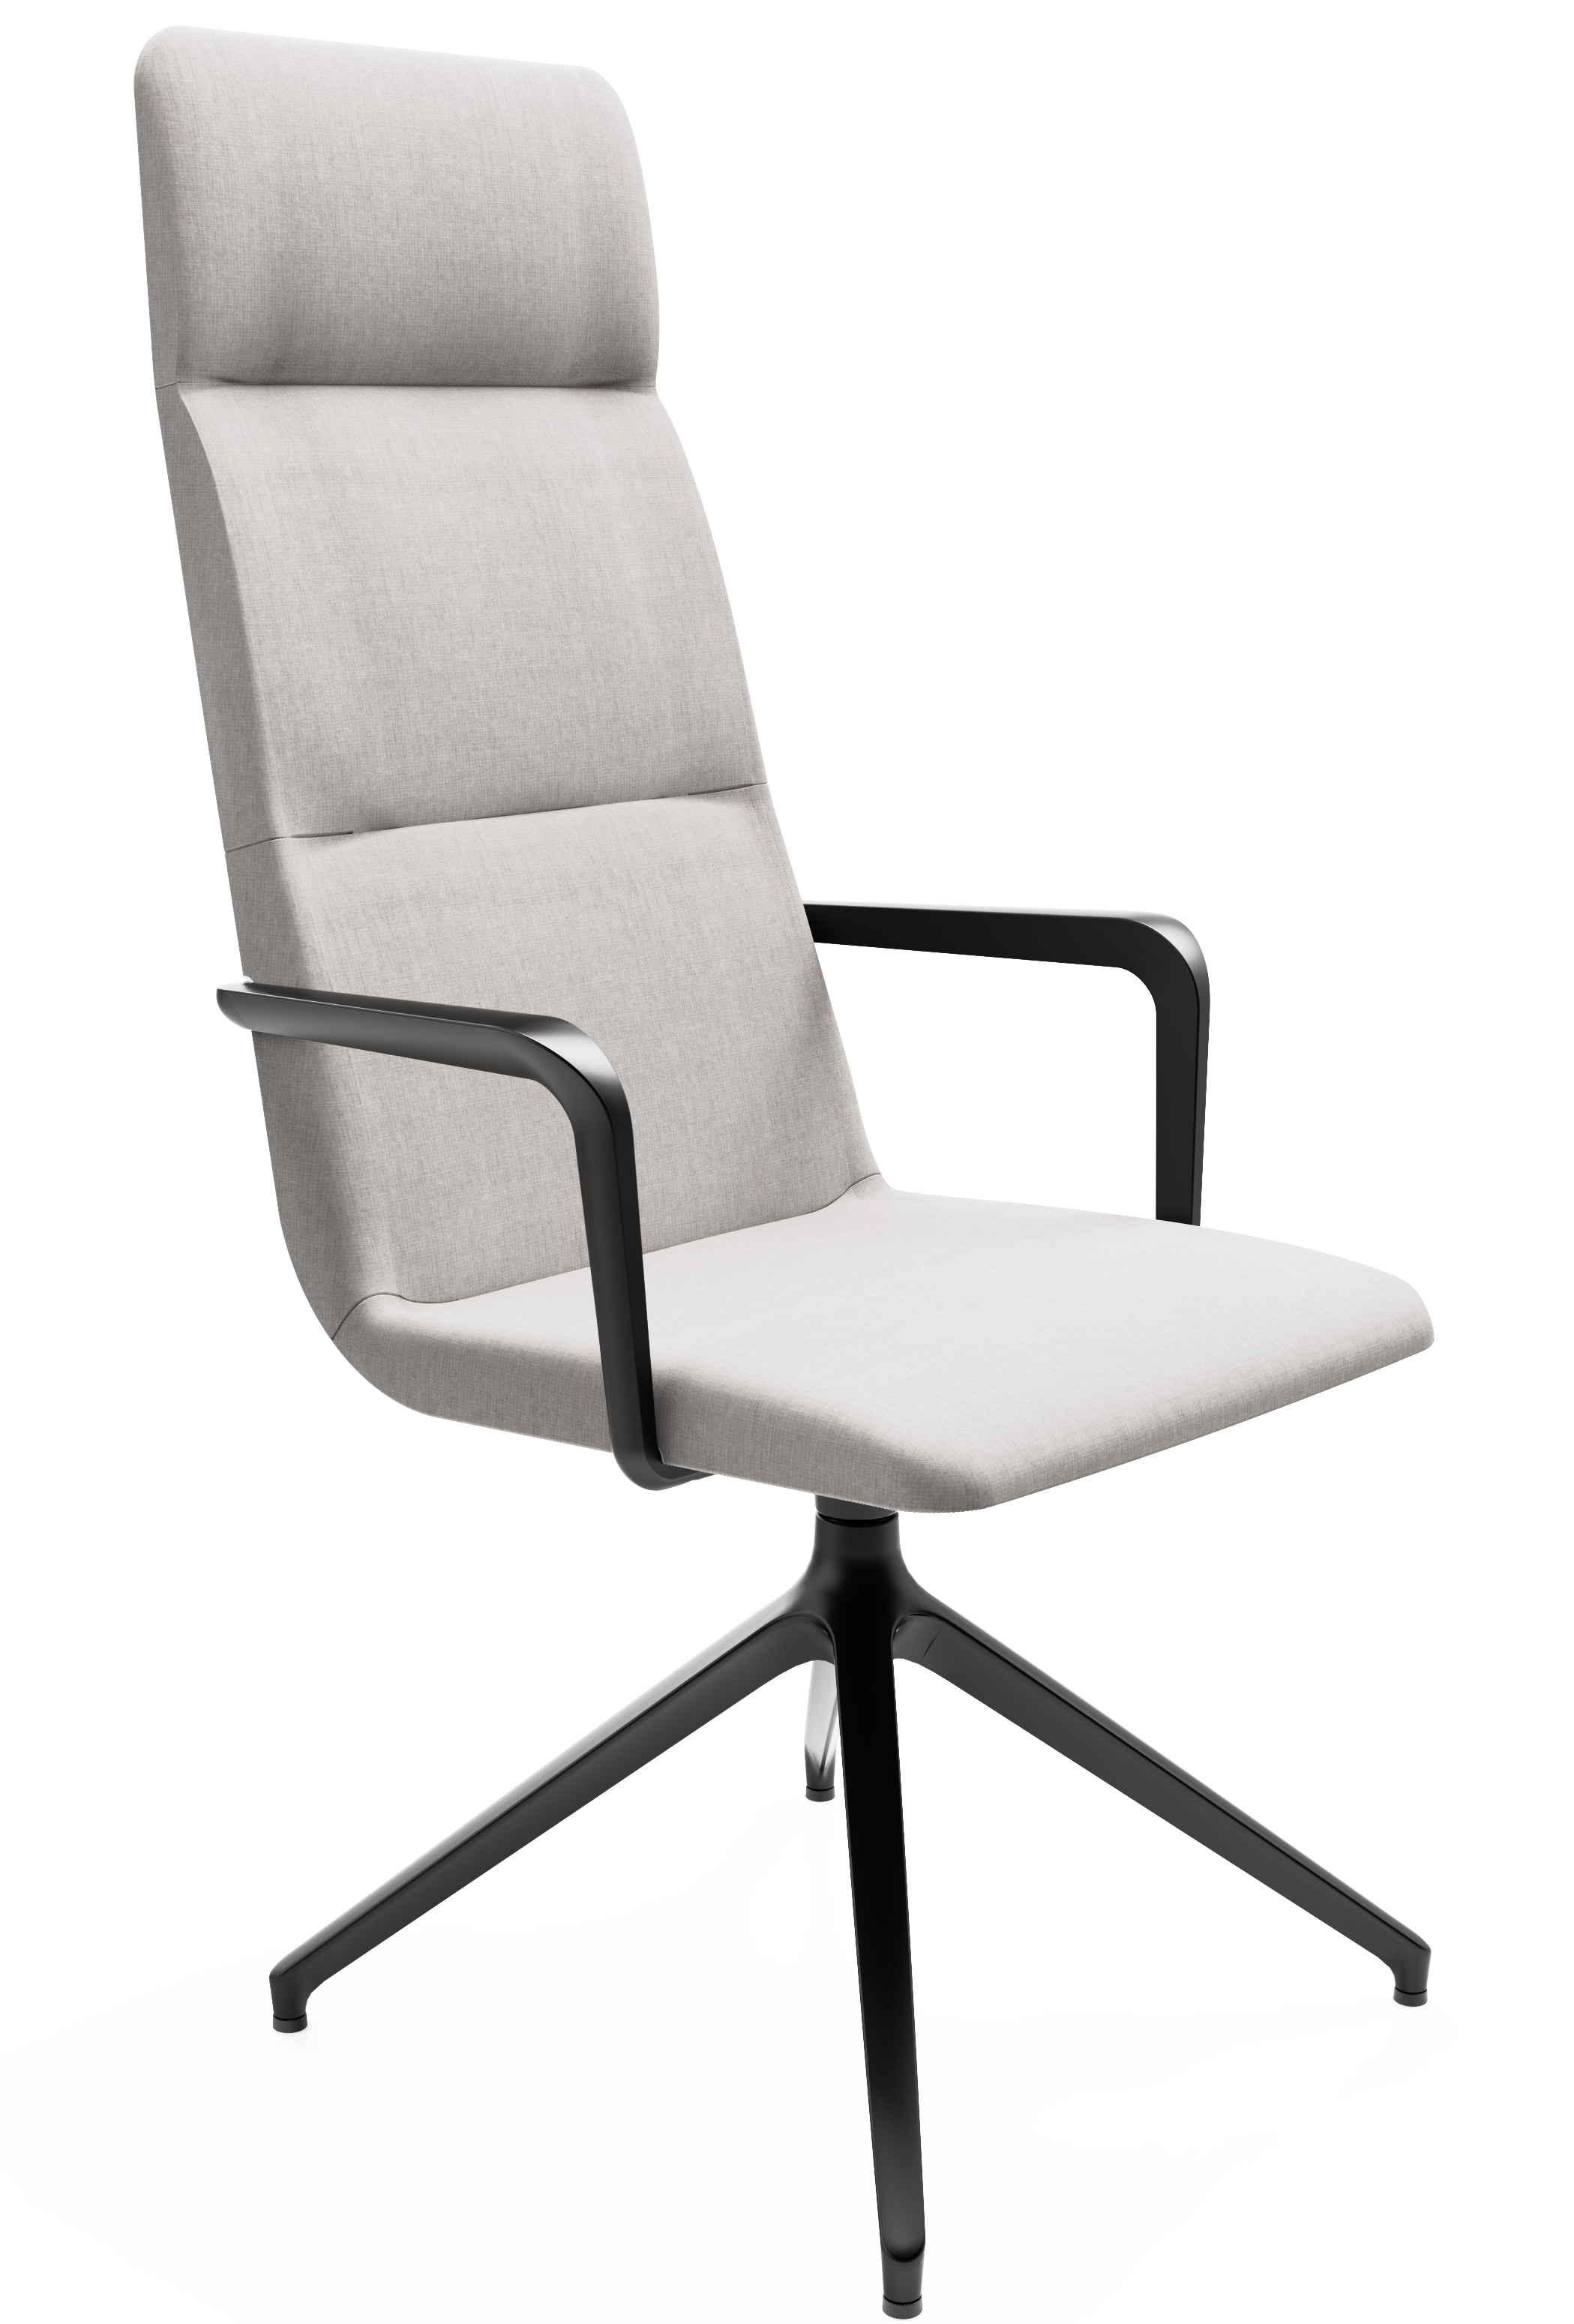 WS - Accord arms high 4 star base chair - black - remix 126 - front